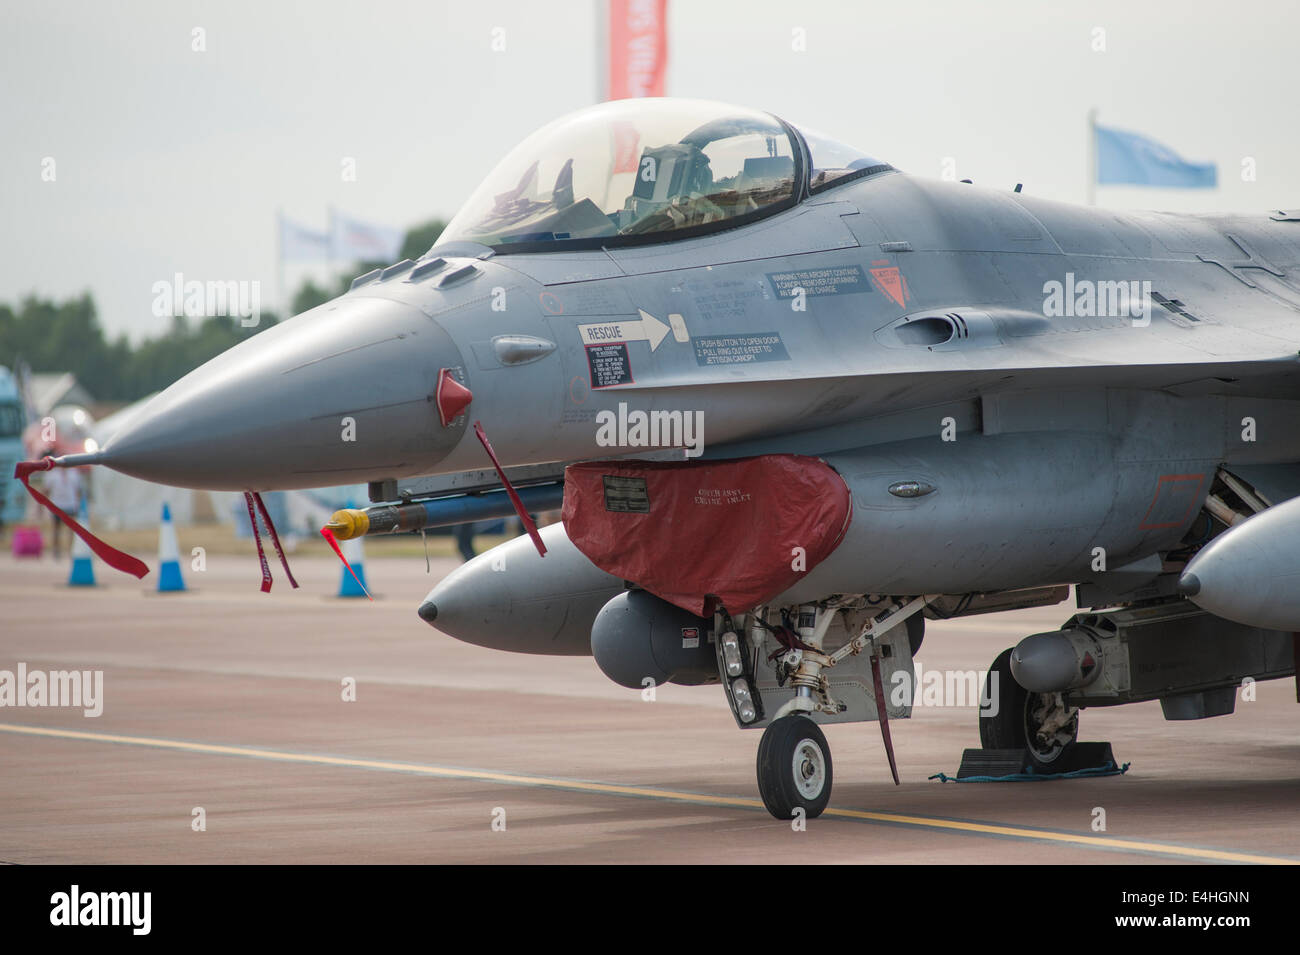 RAF Fairford, Gloucestershire UK. 11th July 2014. Fast jets on static display at the first day of RIAT. Royal Netherlands Air Force F-16 Falcon. Credit:  Malcolm Park editorial/Alamy Live News Stock Photo